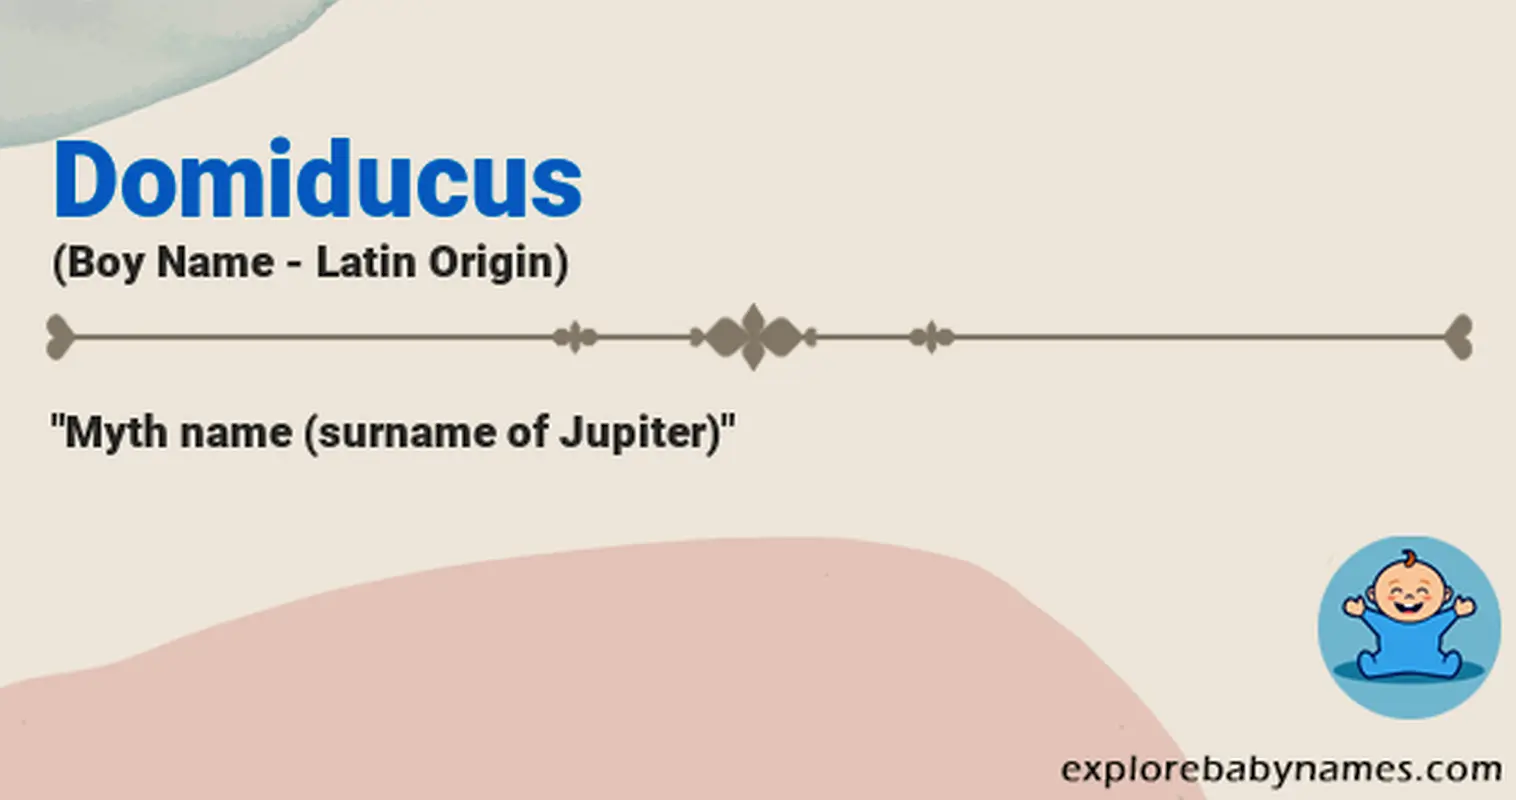 Meaning of Domiducus